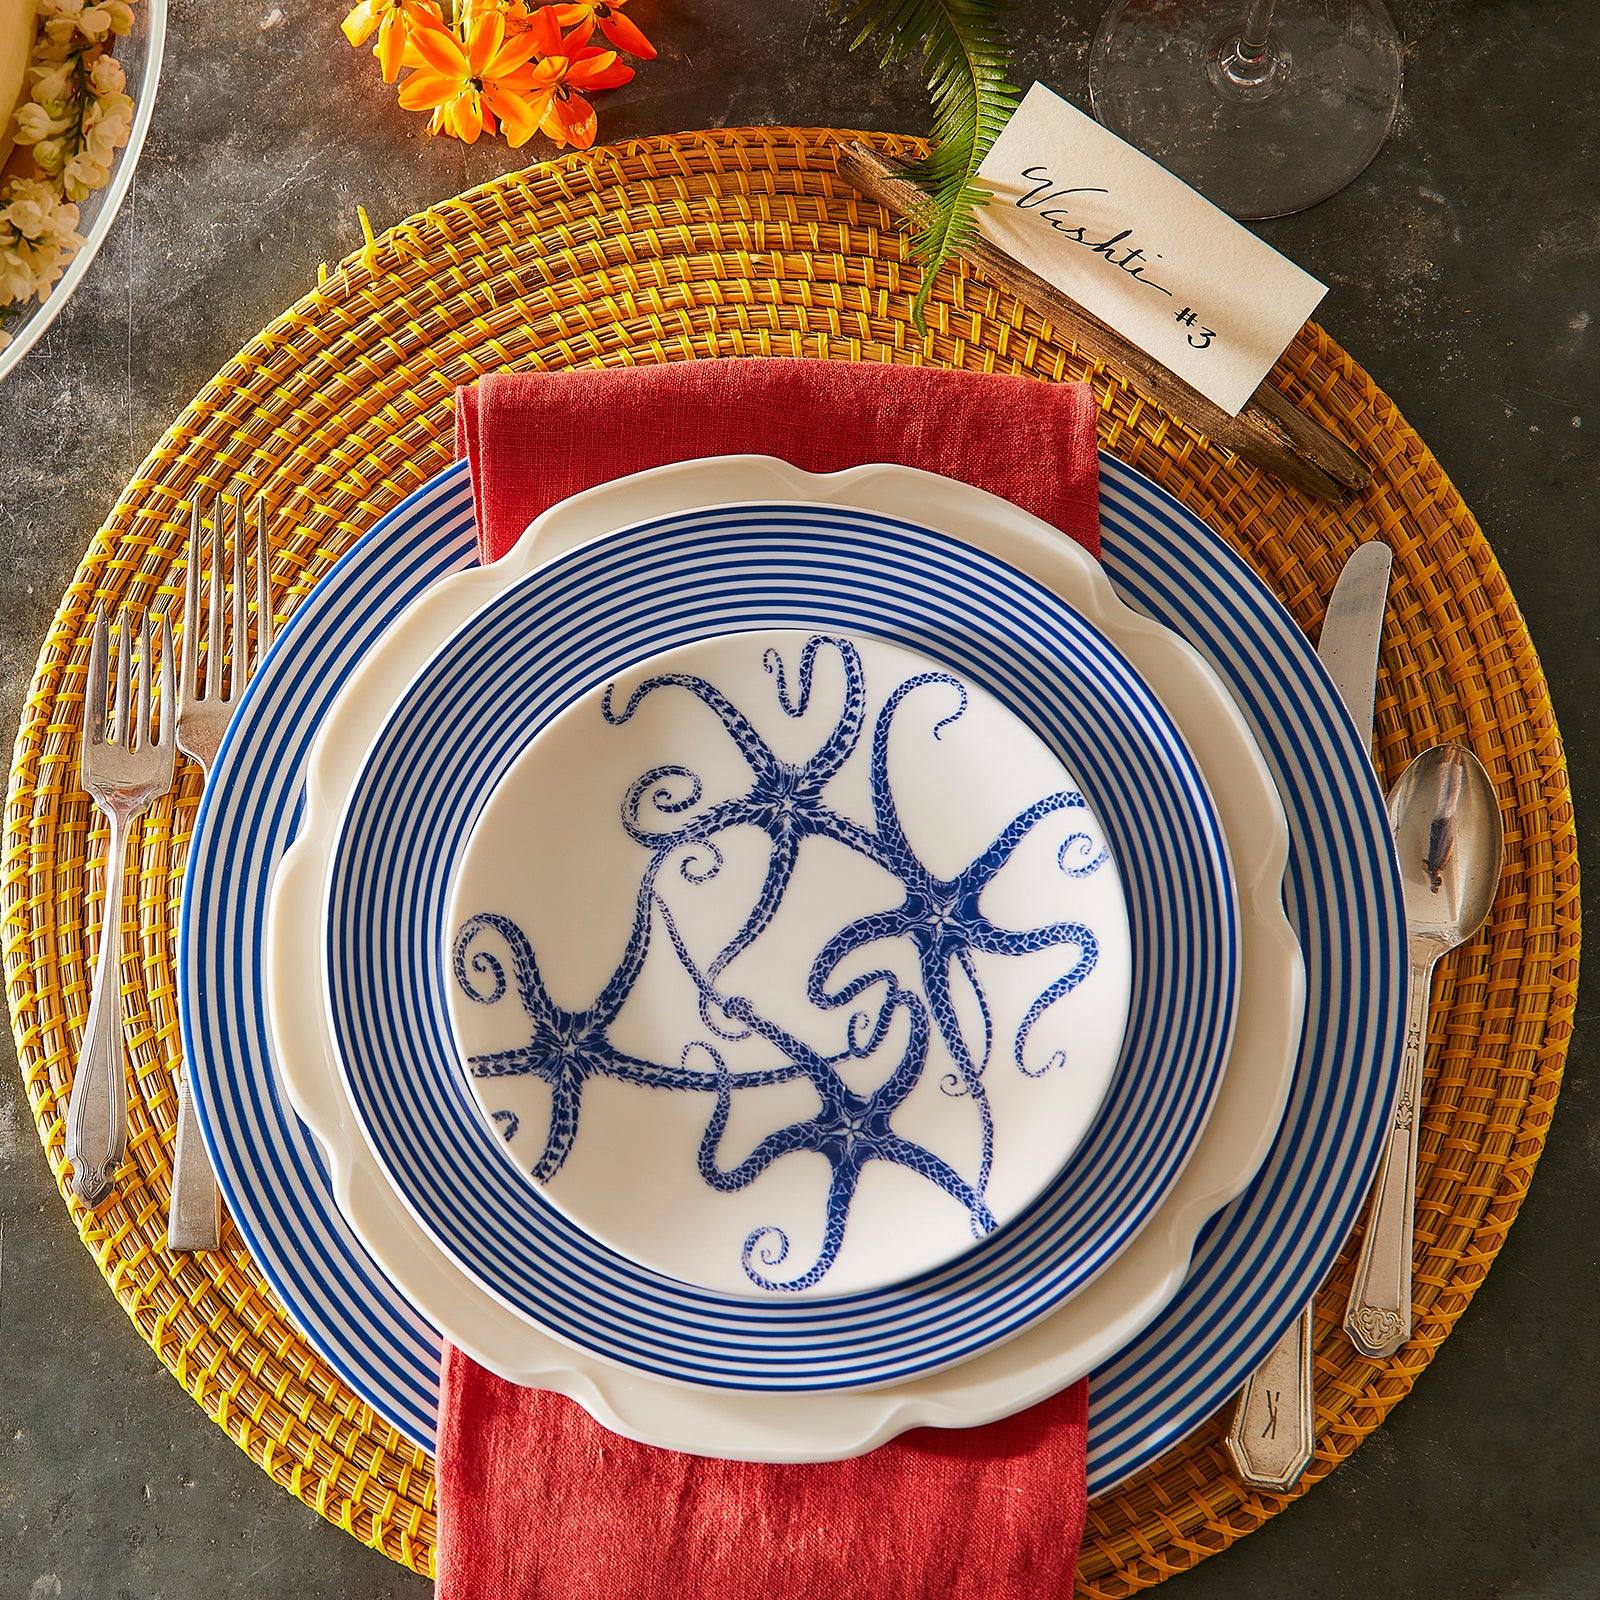 Four white ceramic starfish plates featuring blue starfish designs arranged in a circular pattern, crafted from lead-free porcelain and heirloom-quality dinnerware, called the Starfish Small Plates by Caskata Artisanal Home.